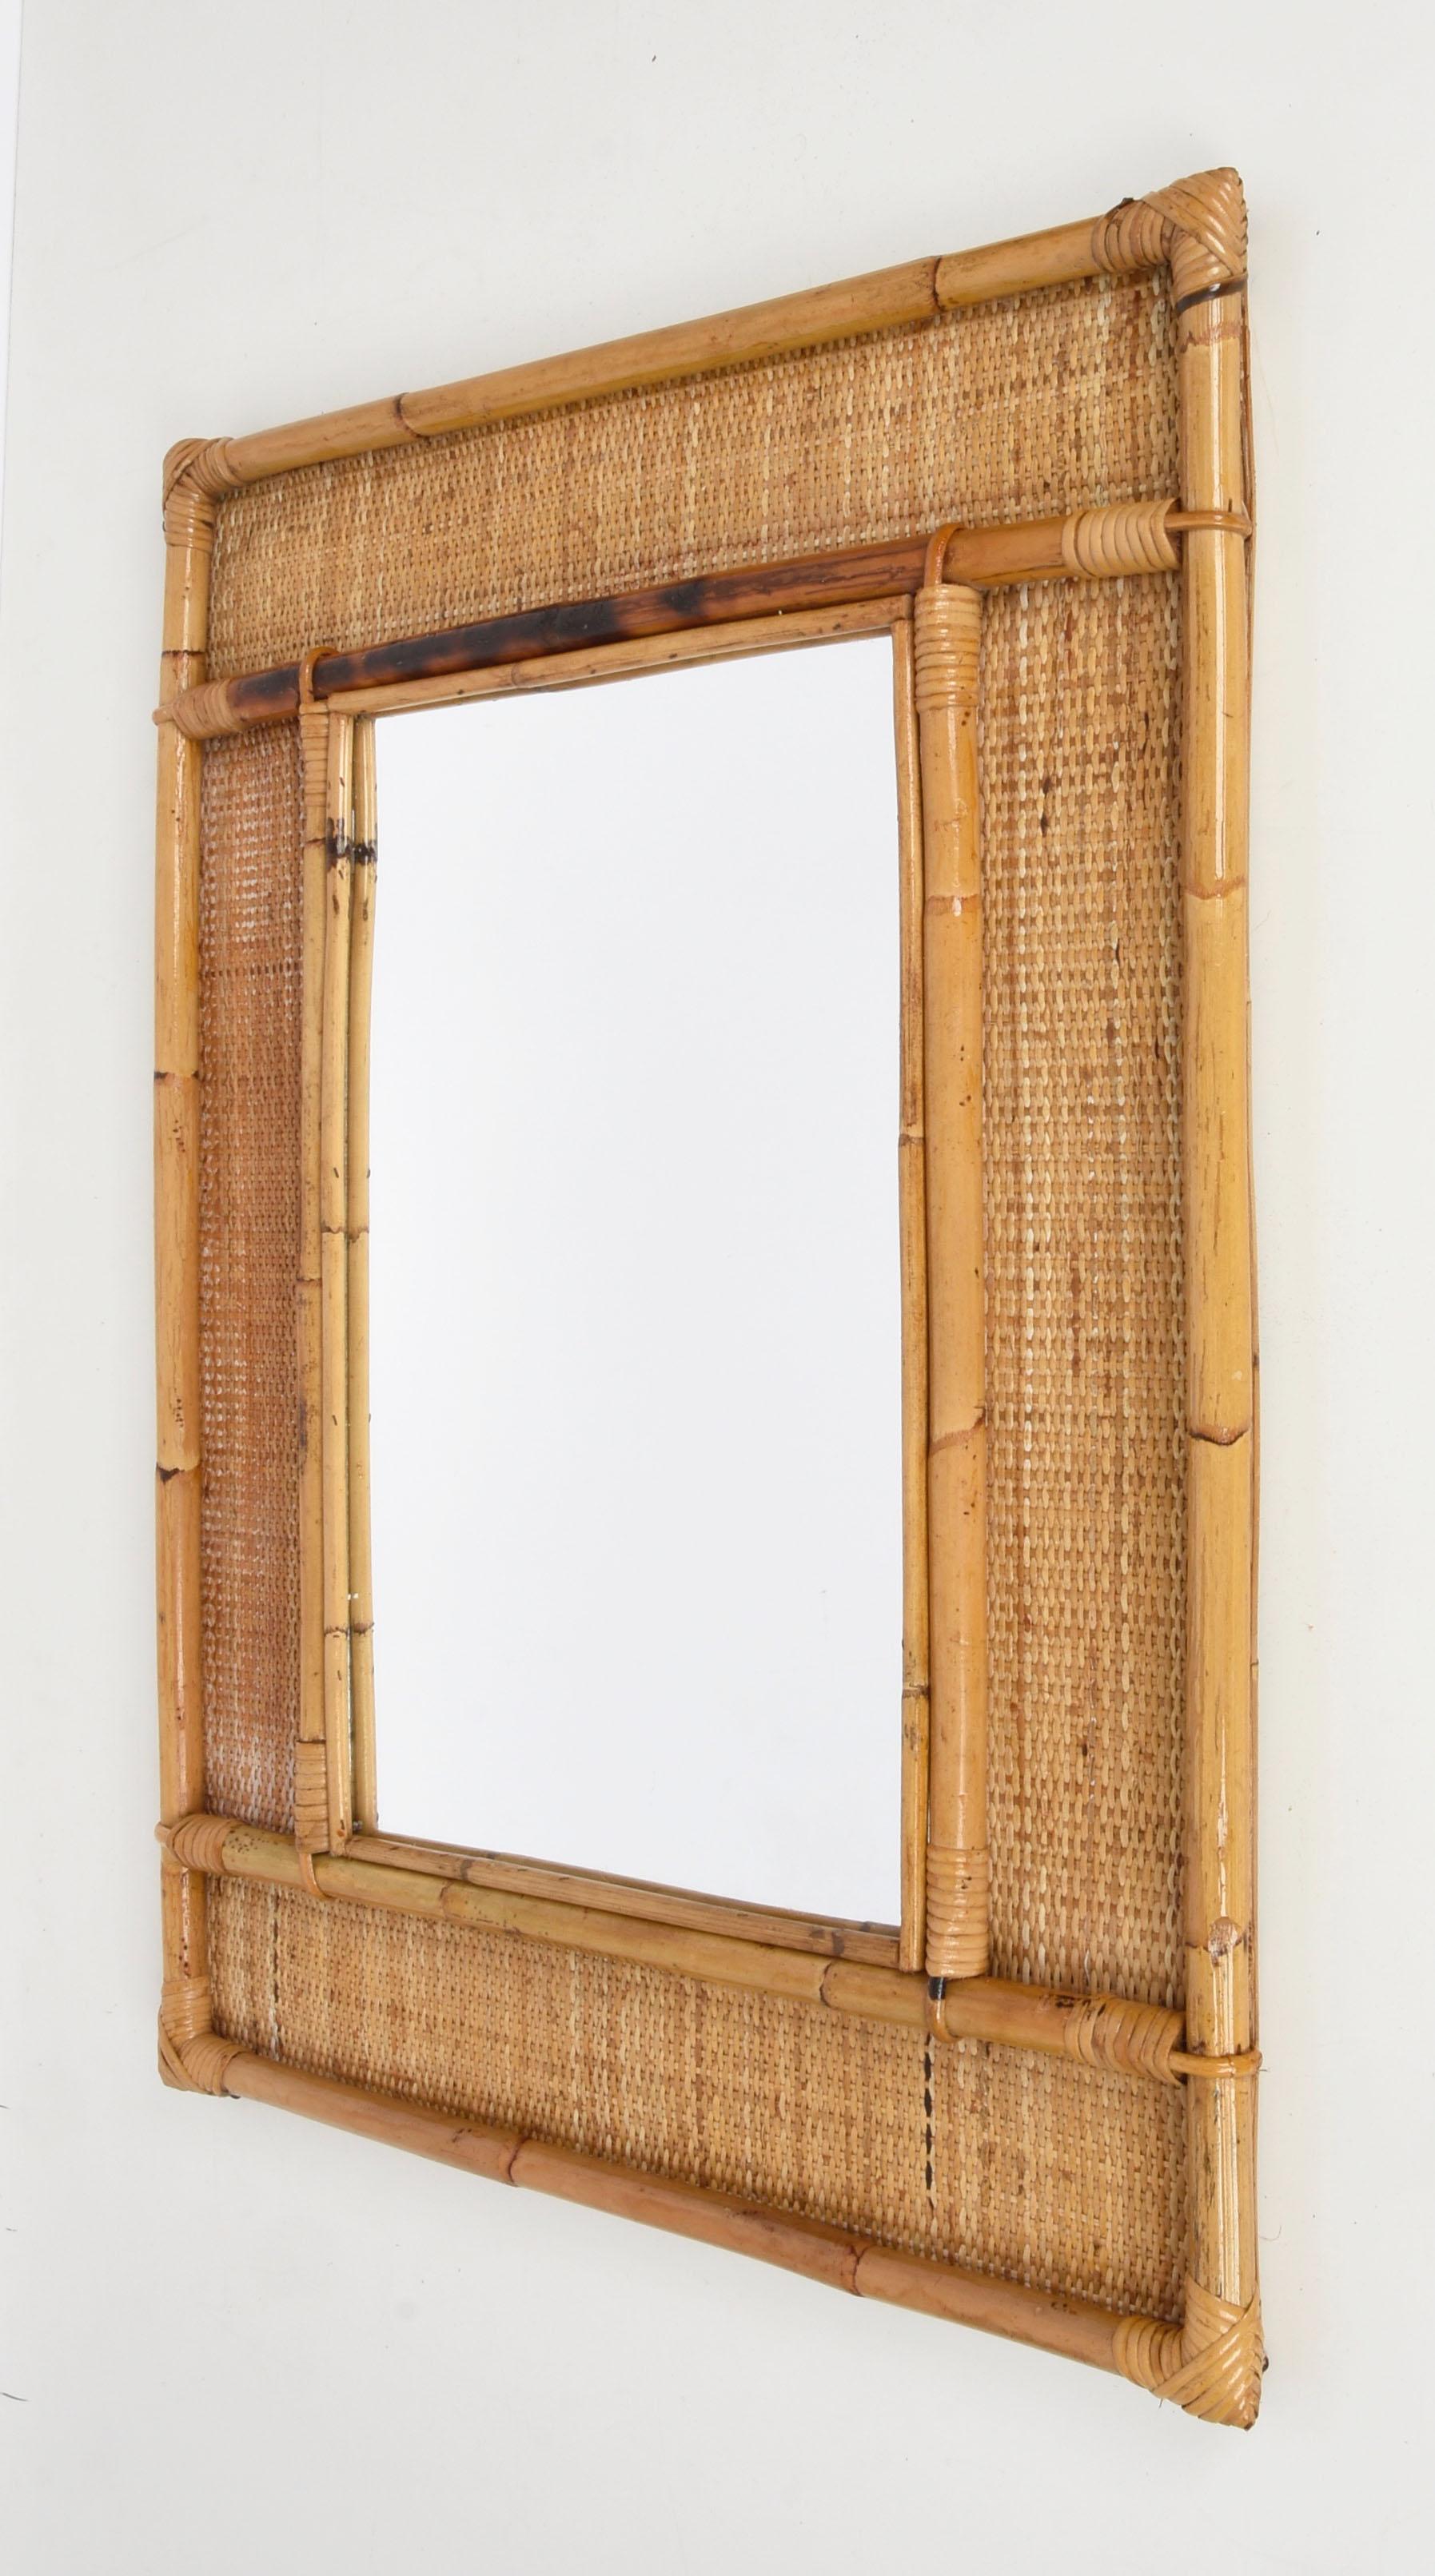 20th Century Midcentury Rectangular Italian Mirror with Bamboo and Woven Wicker Frame, 1970s